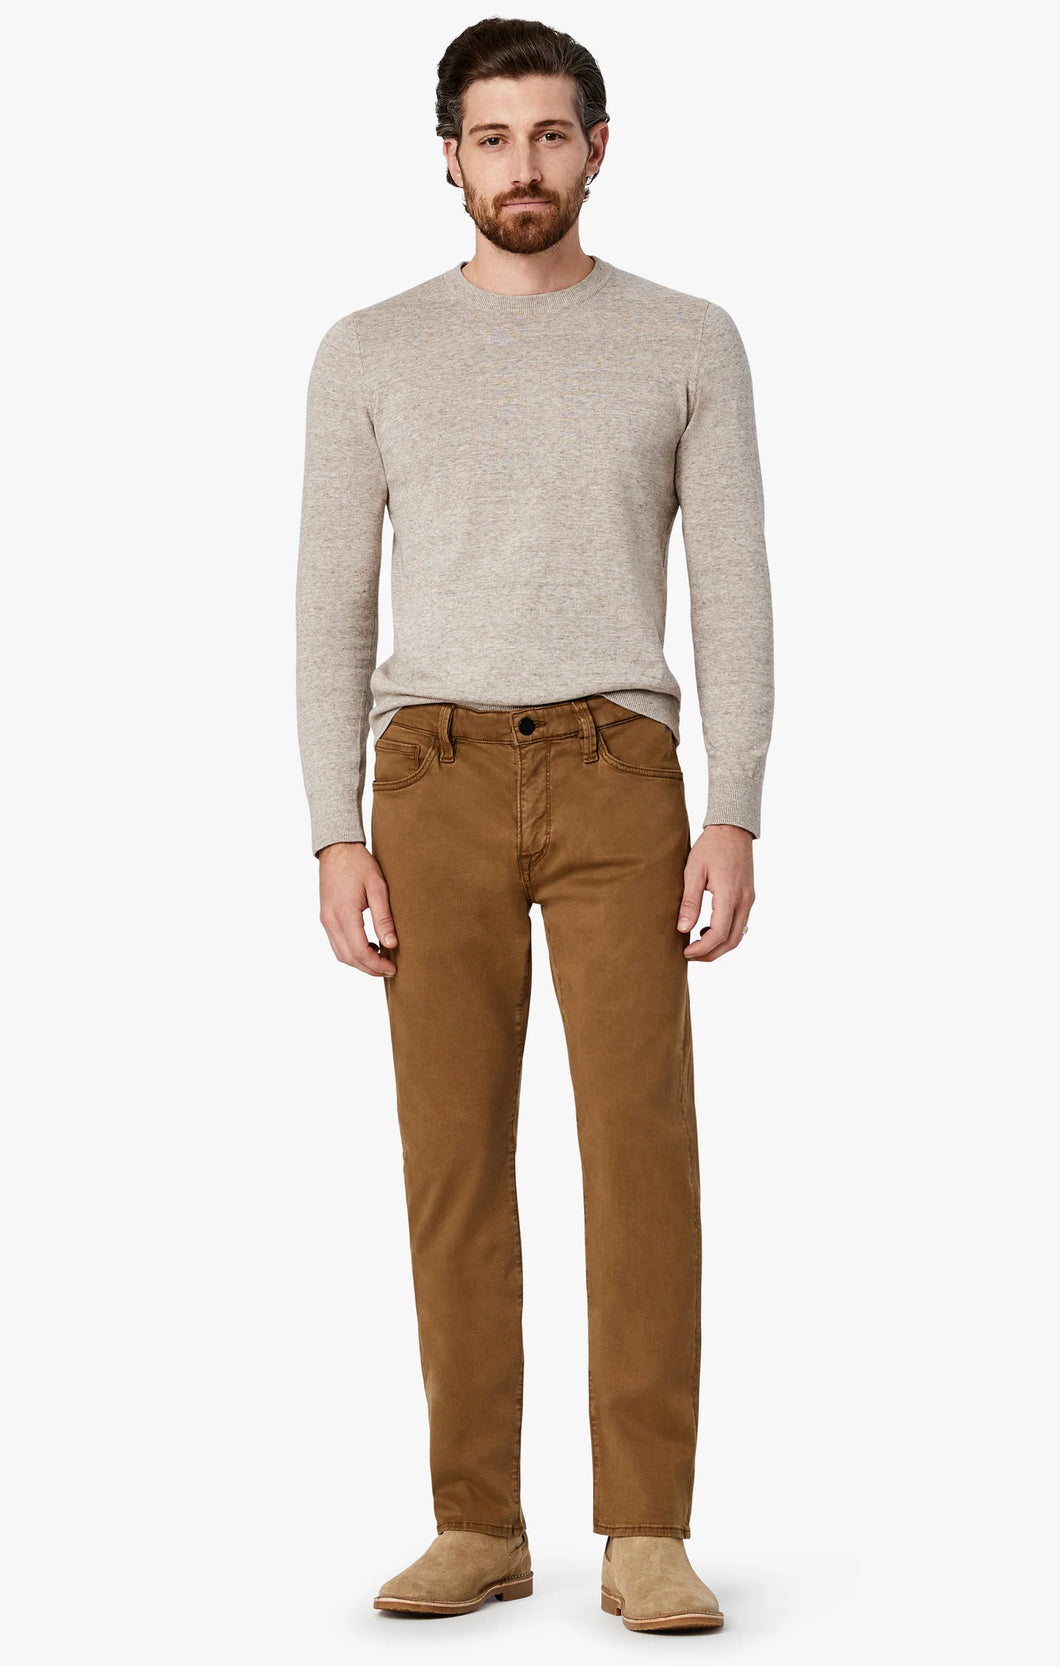 Courage Twill Pant